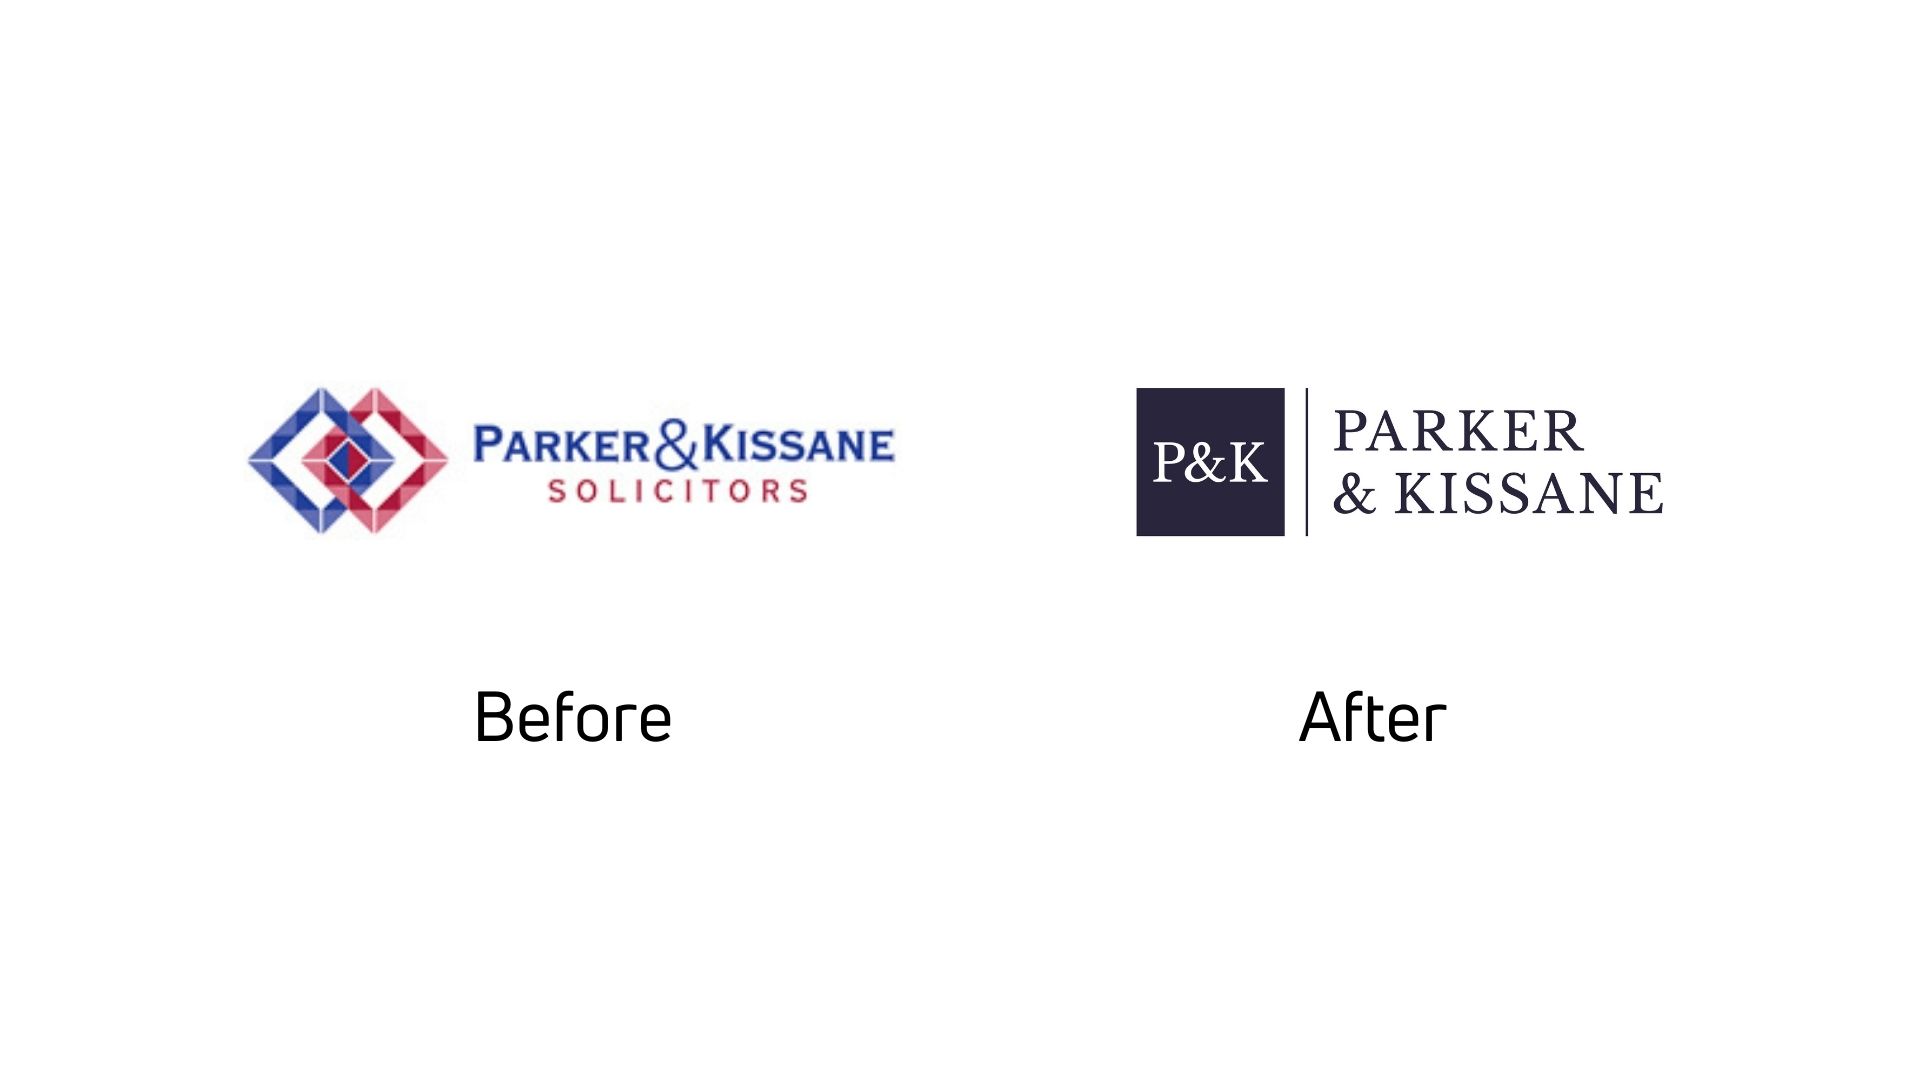 Parker & Kissane Logo before and after